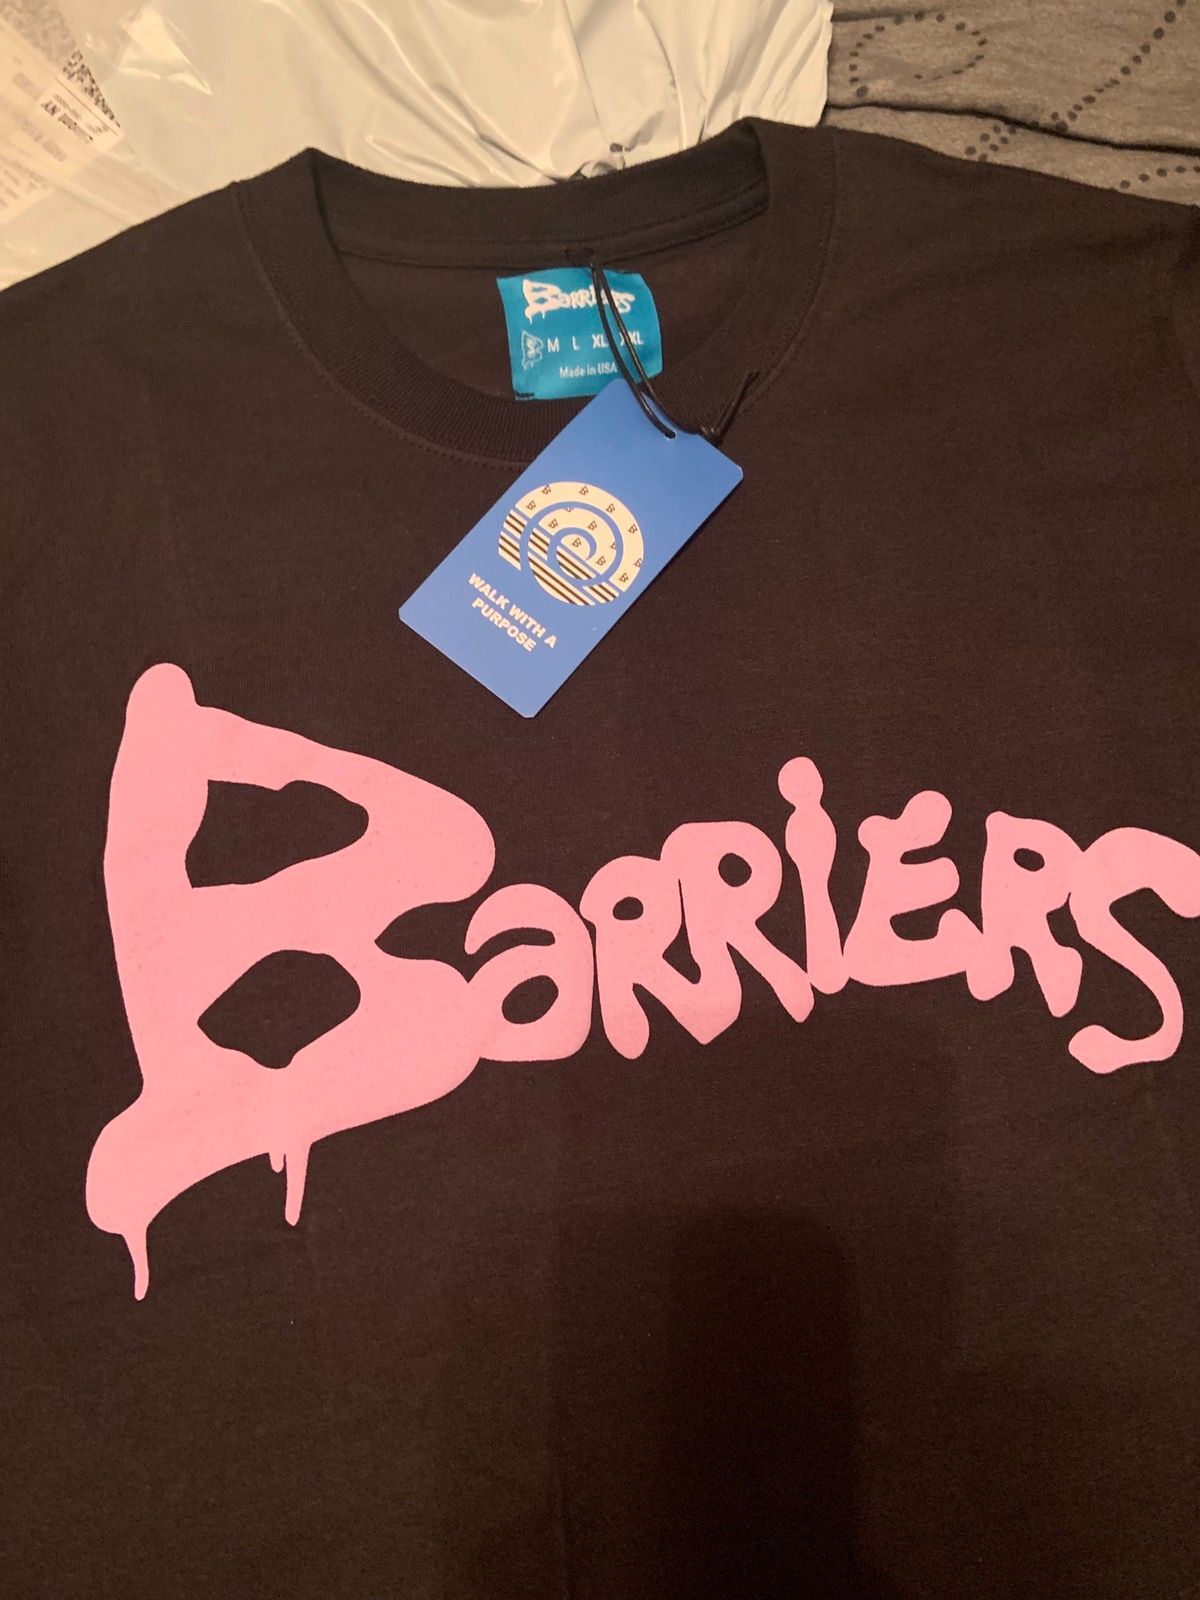 Barriers Barriers shirt Size US S / EU 44-46 / 1 - 1 Preview